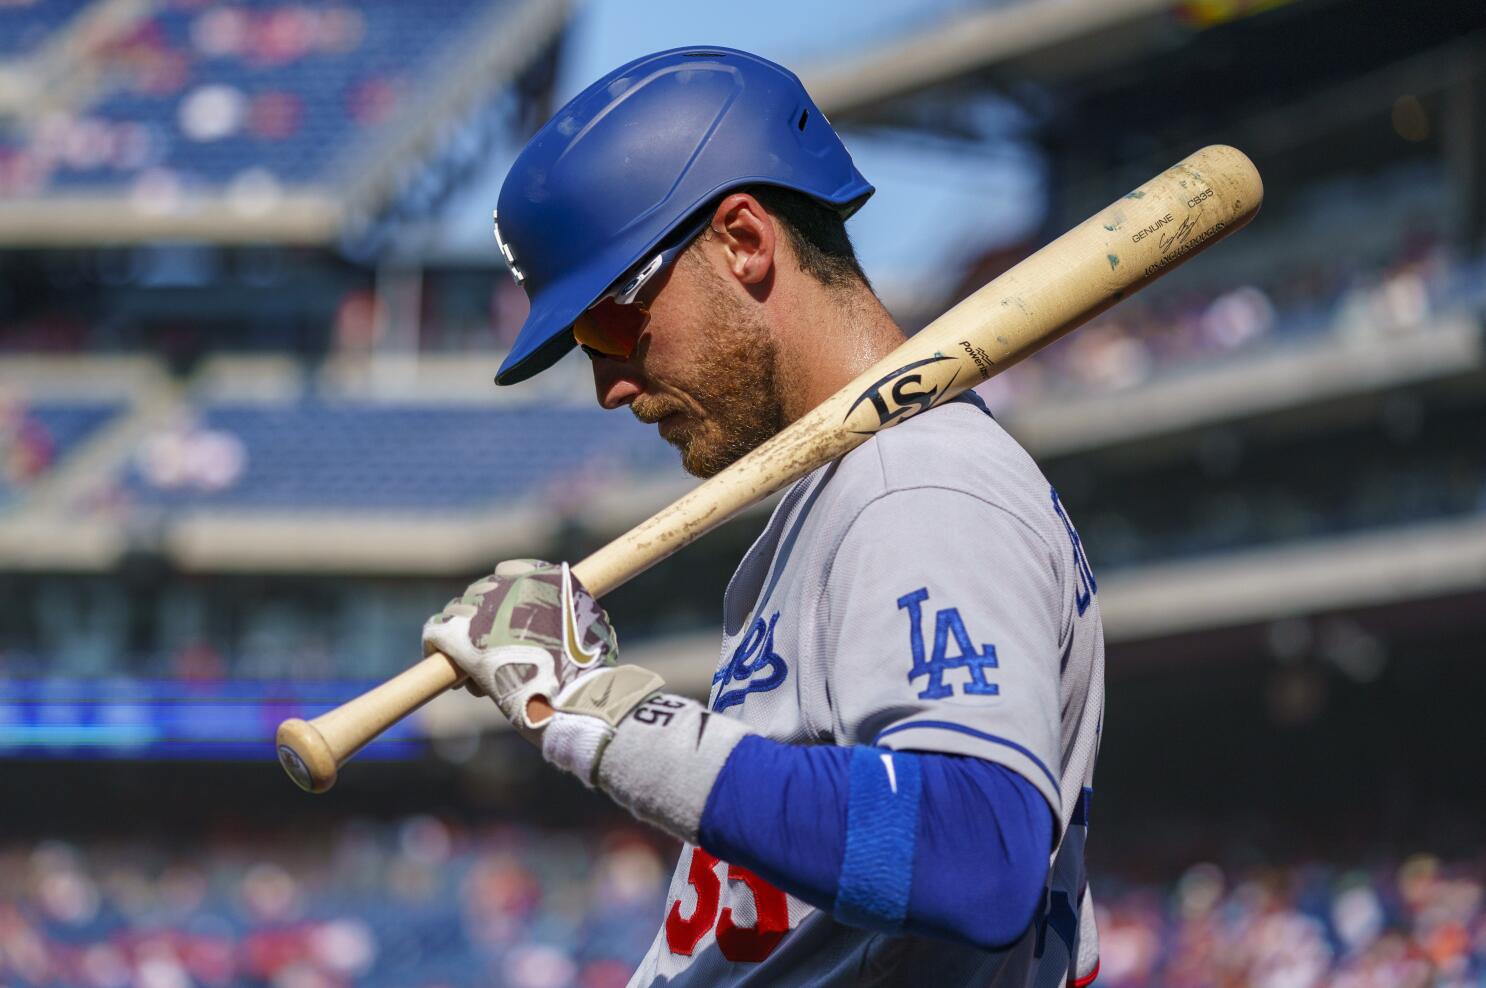 Cody Bellinger's career with Dodgers ends as he agrees to terms